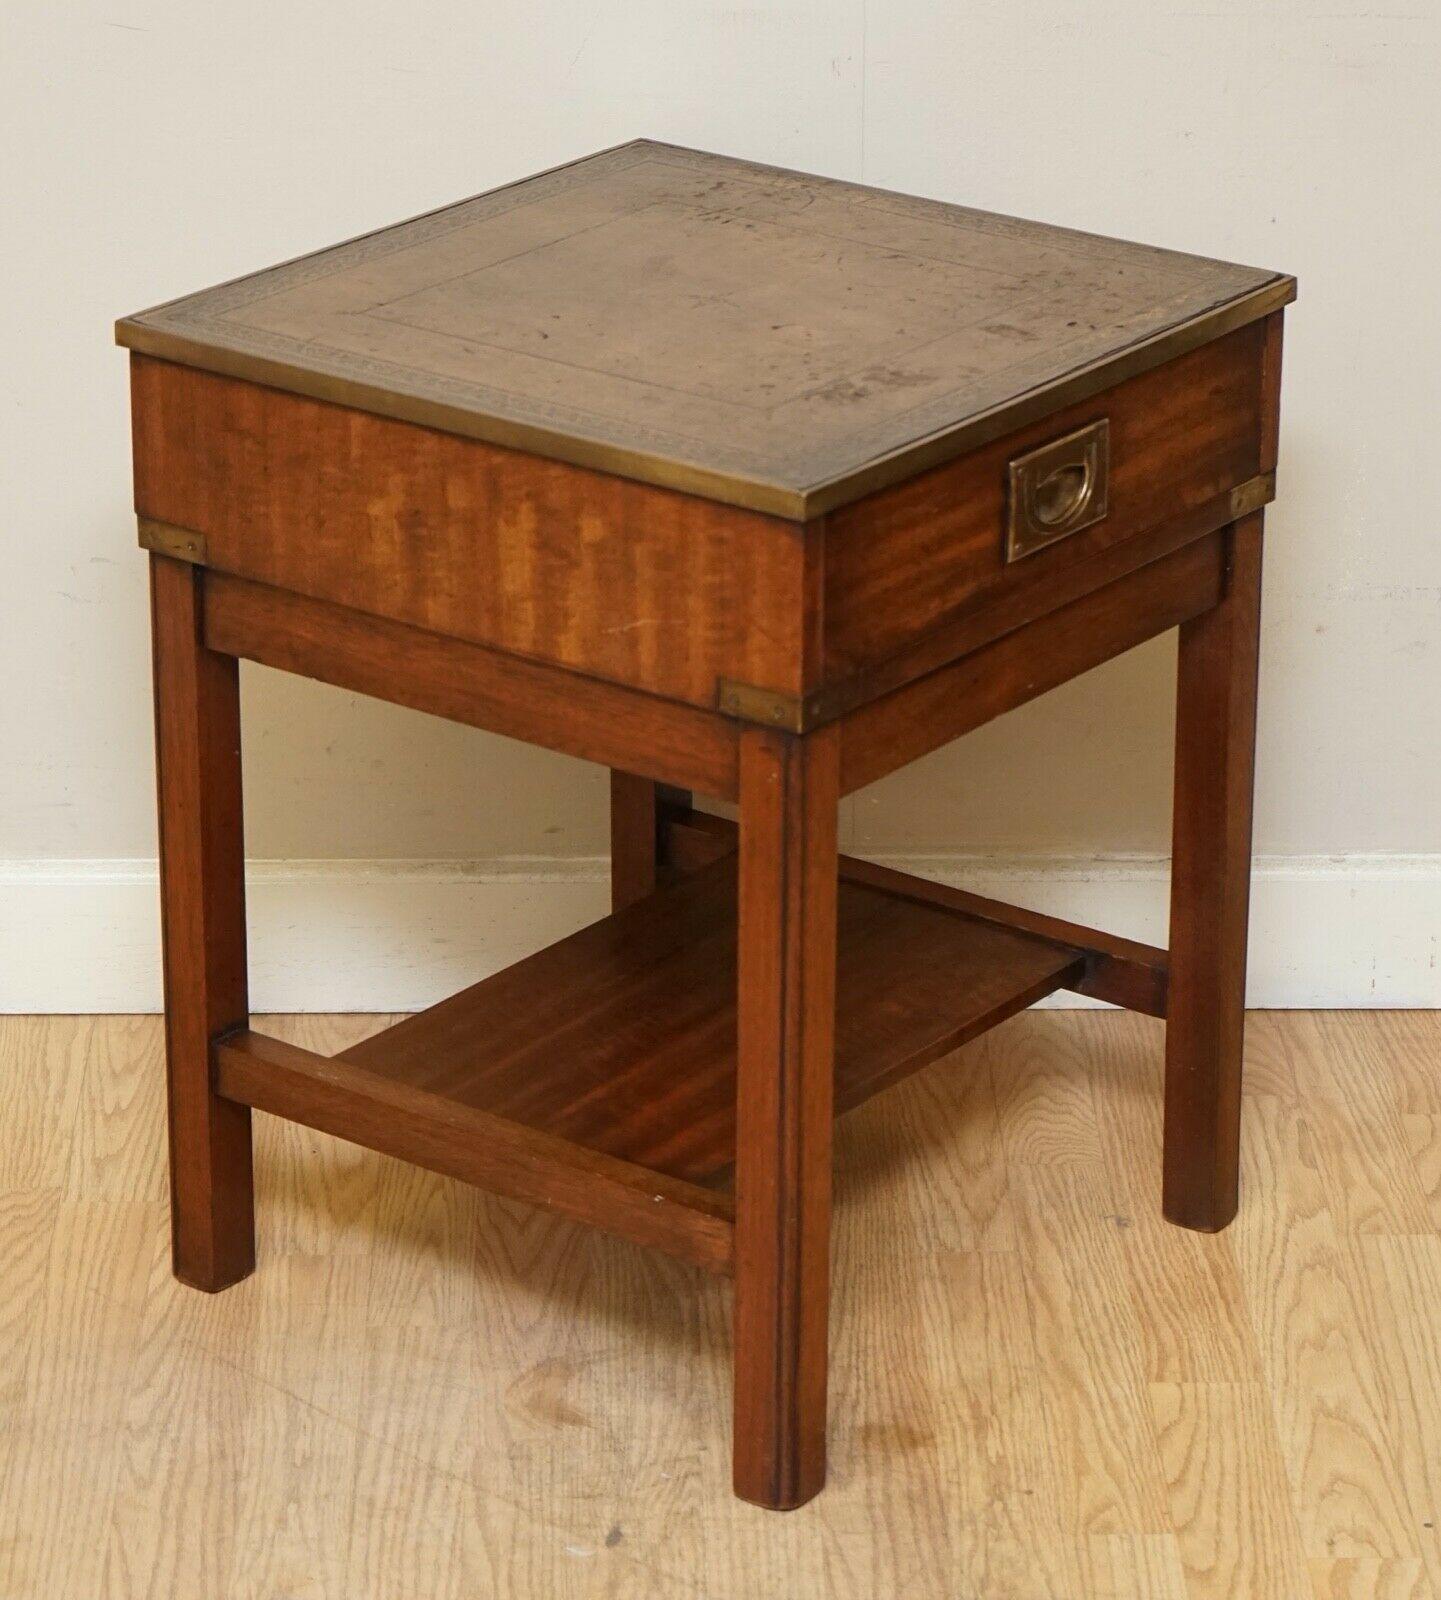 Hand-Crafted Pair of Vintage Military Campaign Bedside Tables with Brown Leather Top